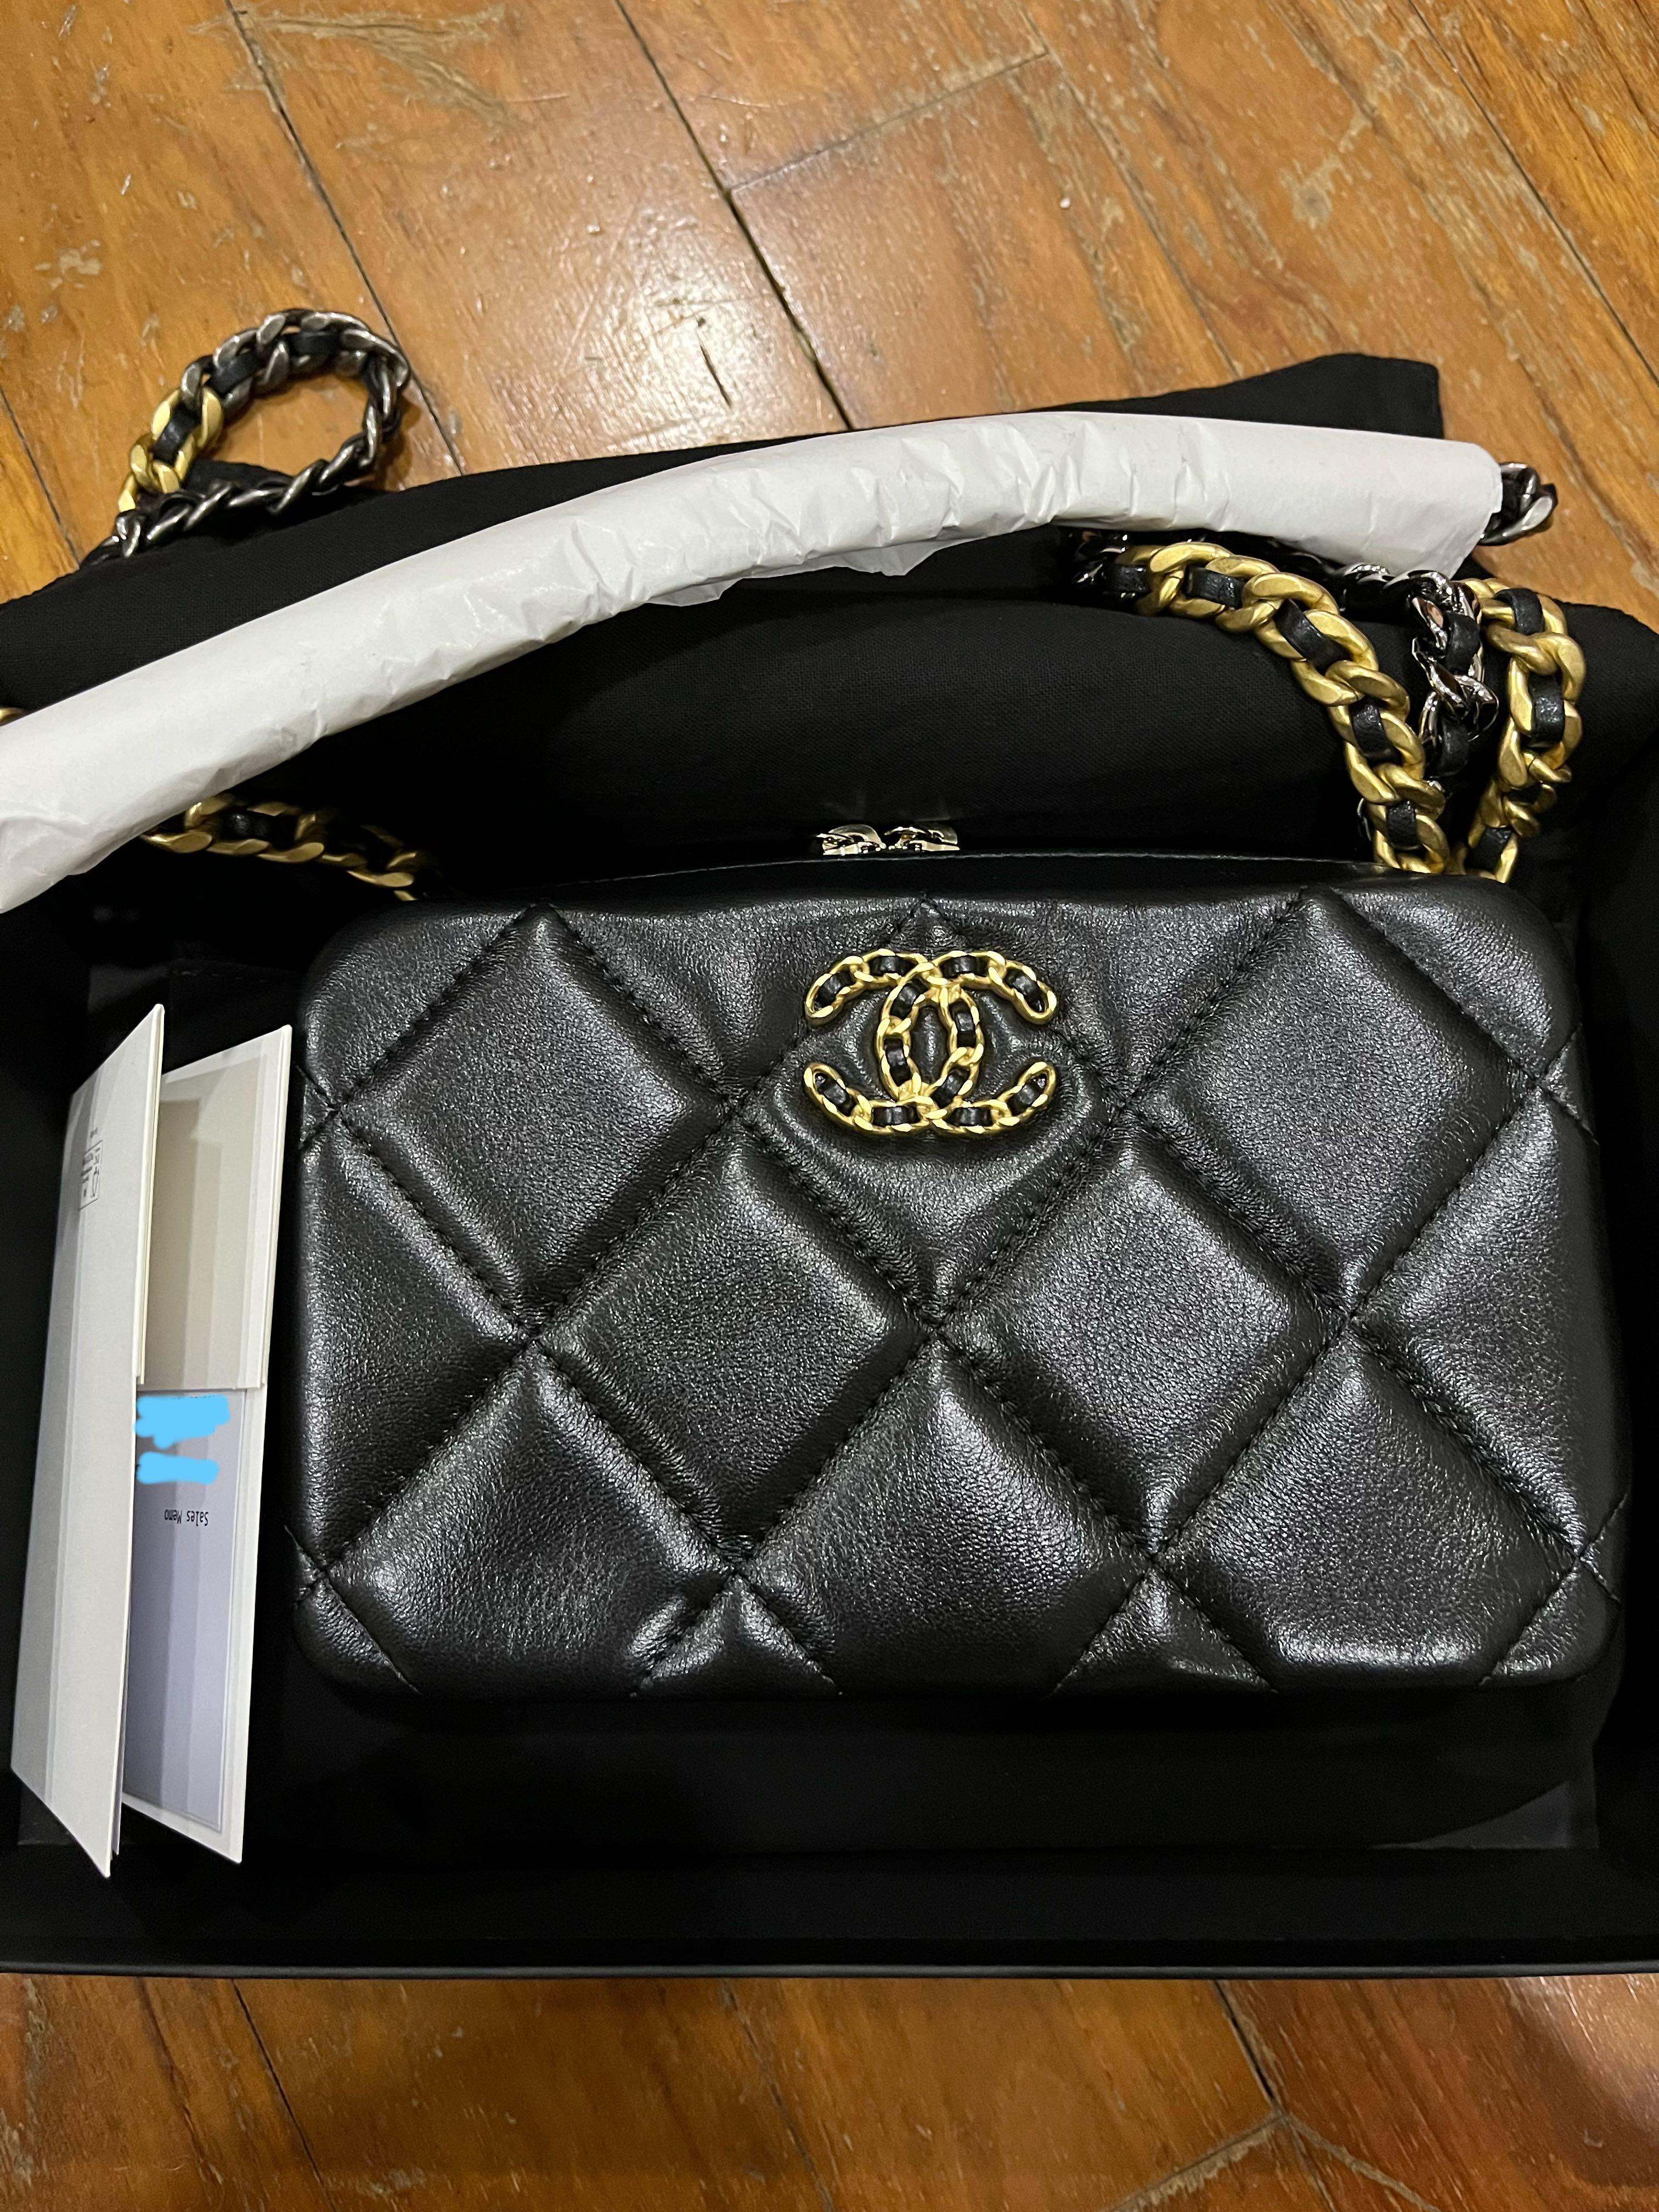 Used once !! Chanel 19 flap bag size :30 holo30 shop Thai 01/2022